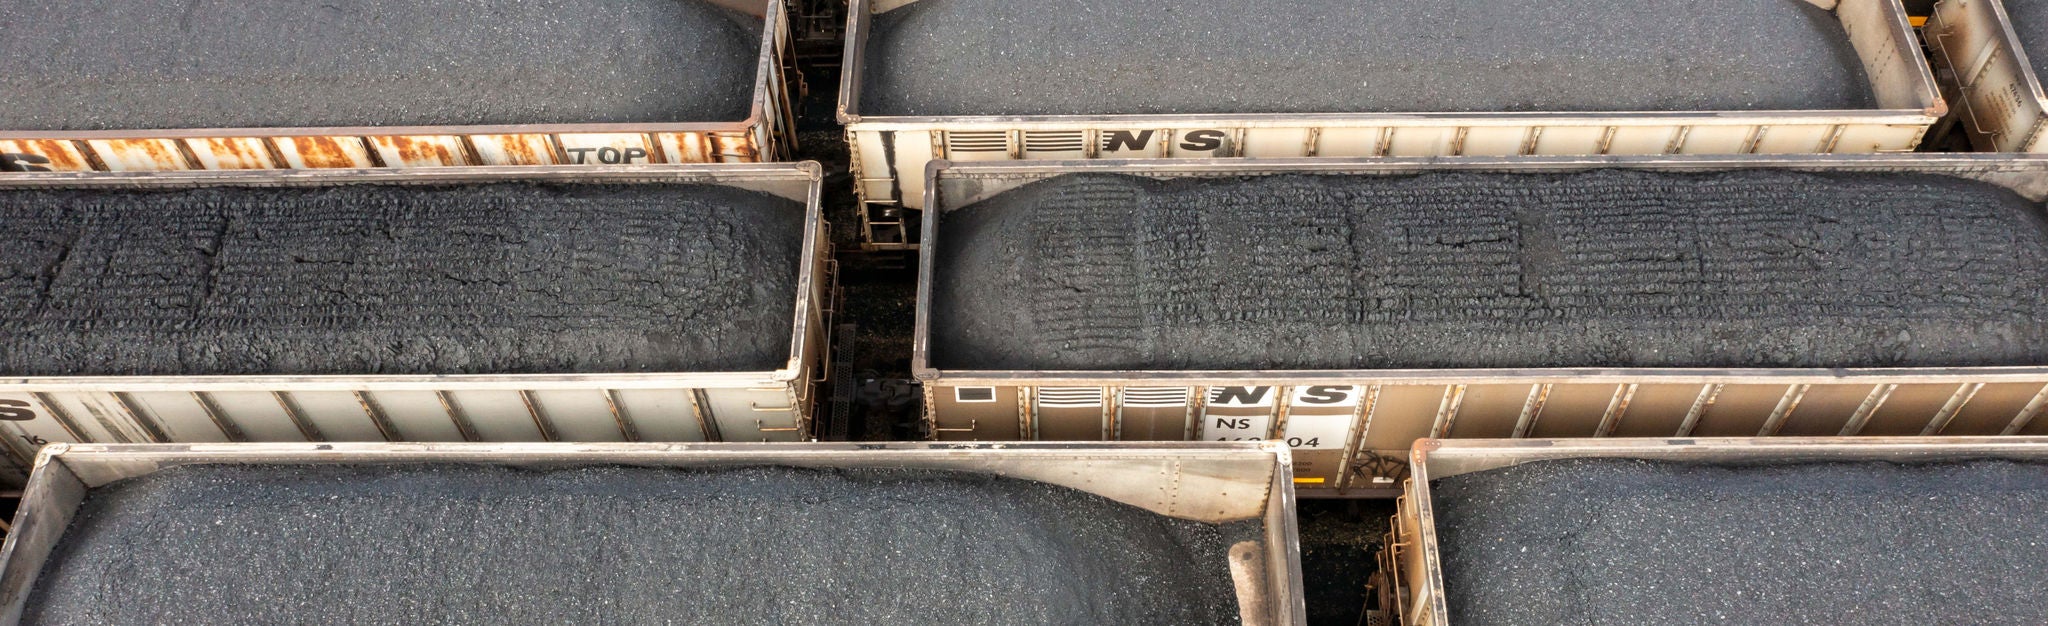 An aerial photo of Norfolk Southern coal cars ready for coal transportation.